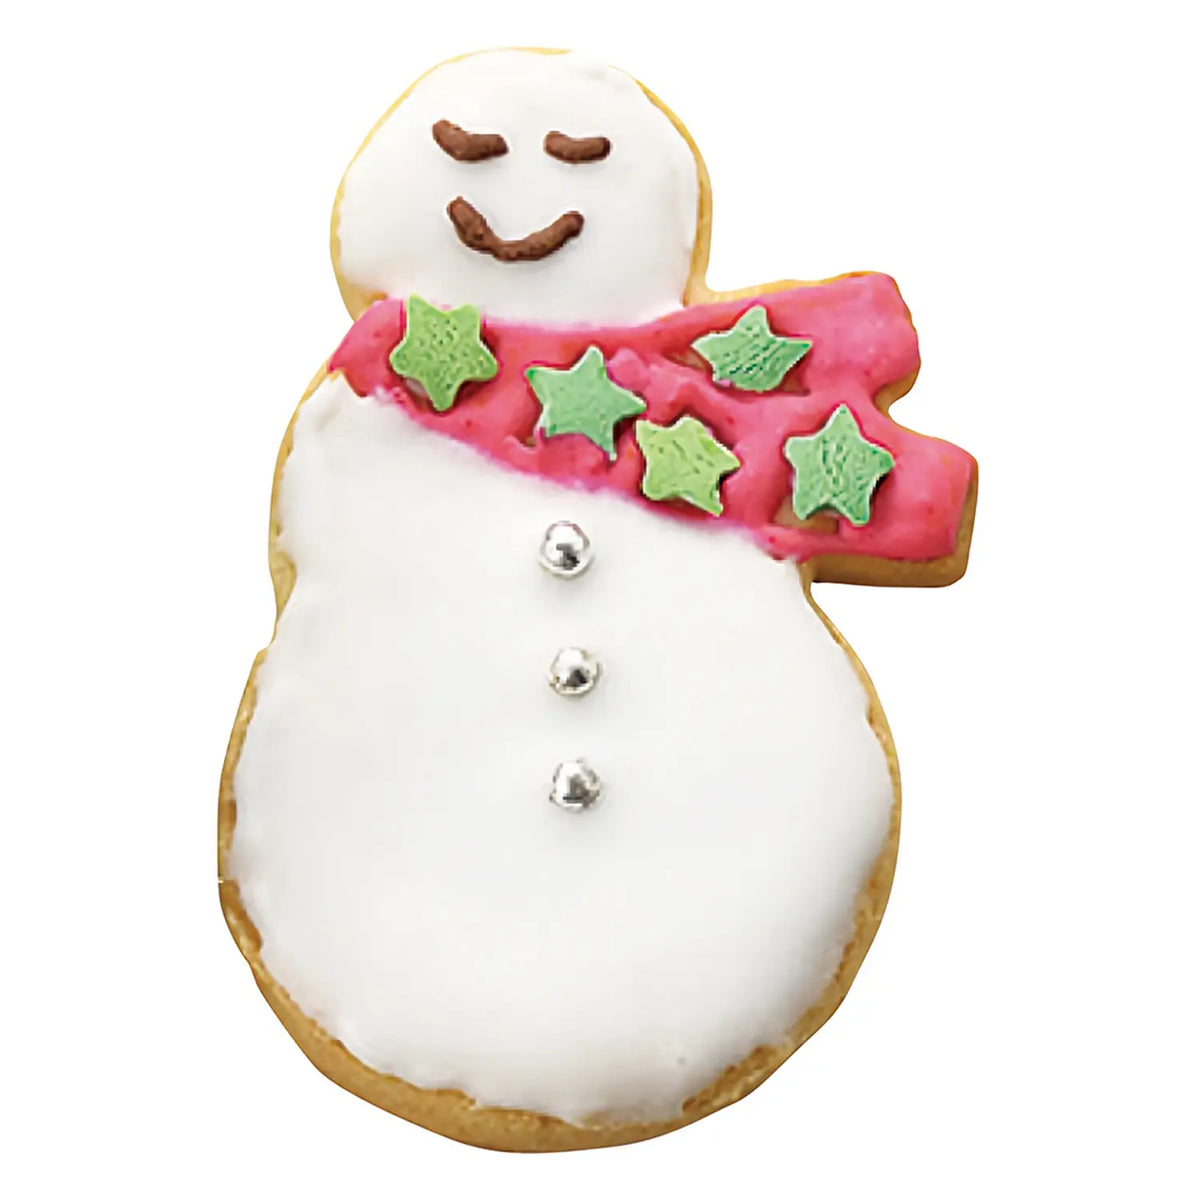 TIGERCROWN Cake Land Stainless Steel Cookie Cutter Snowman with Scarf